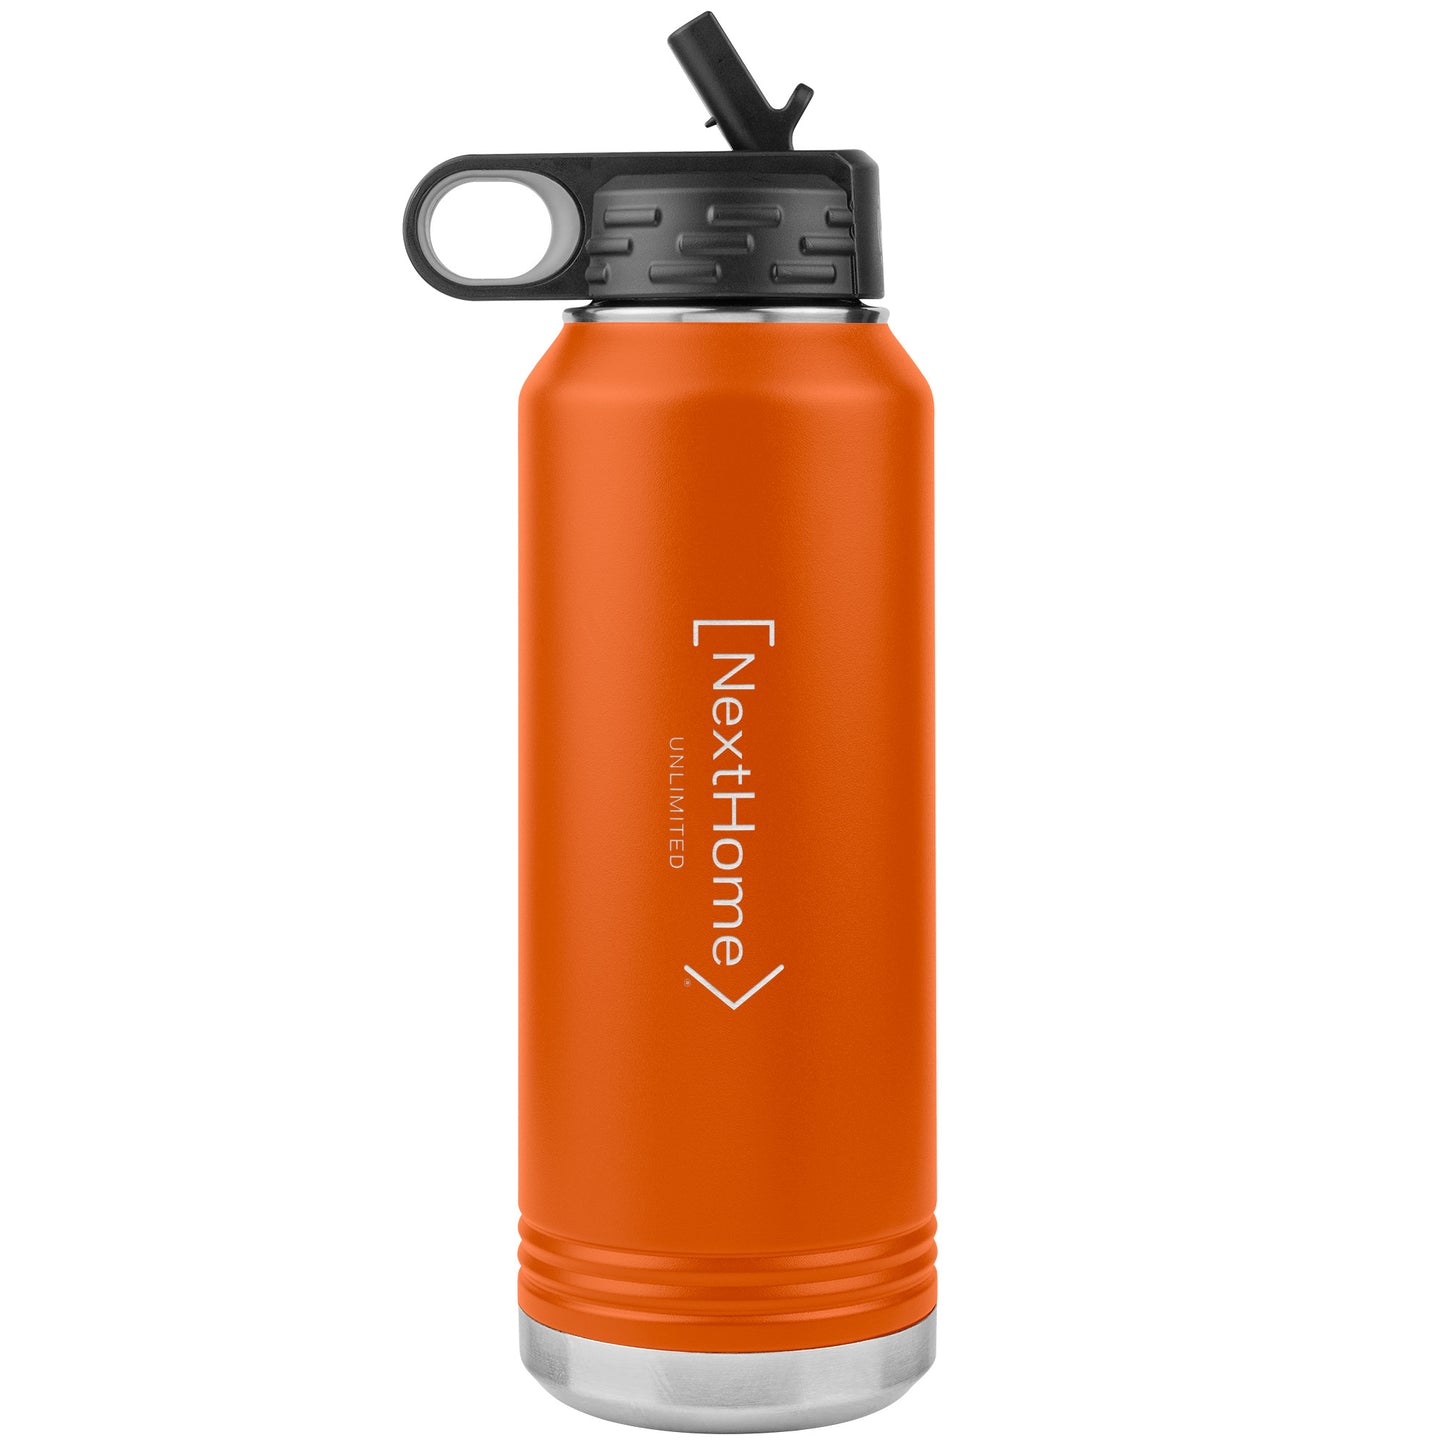 NextHome Unlimited Water Bottle